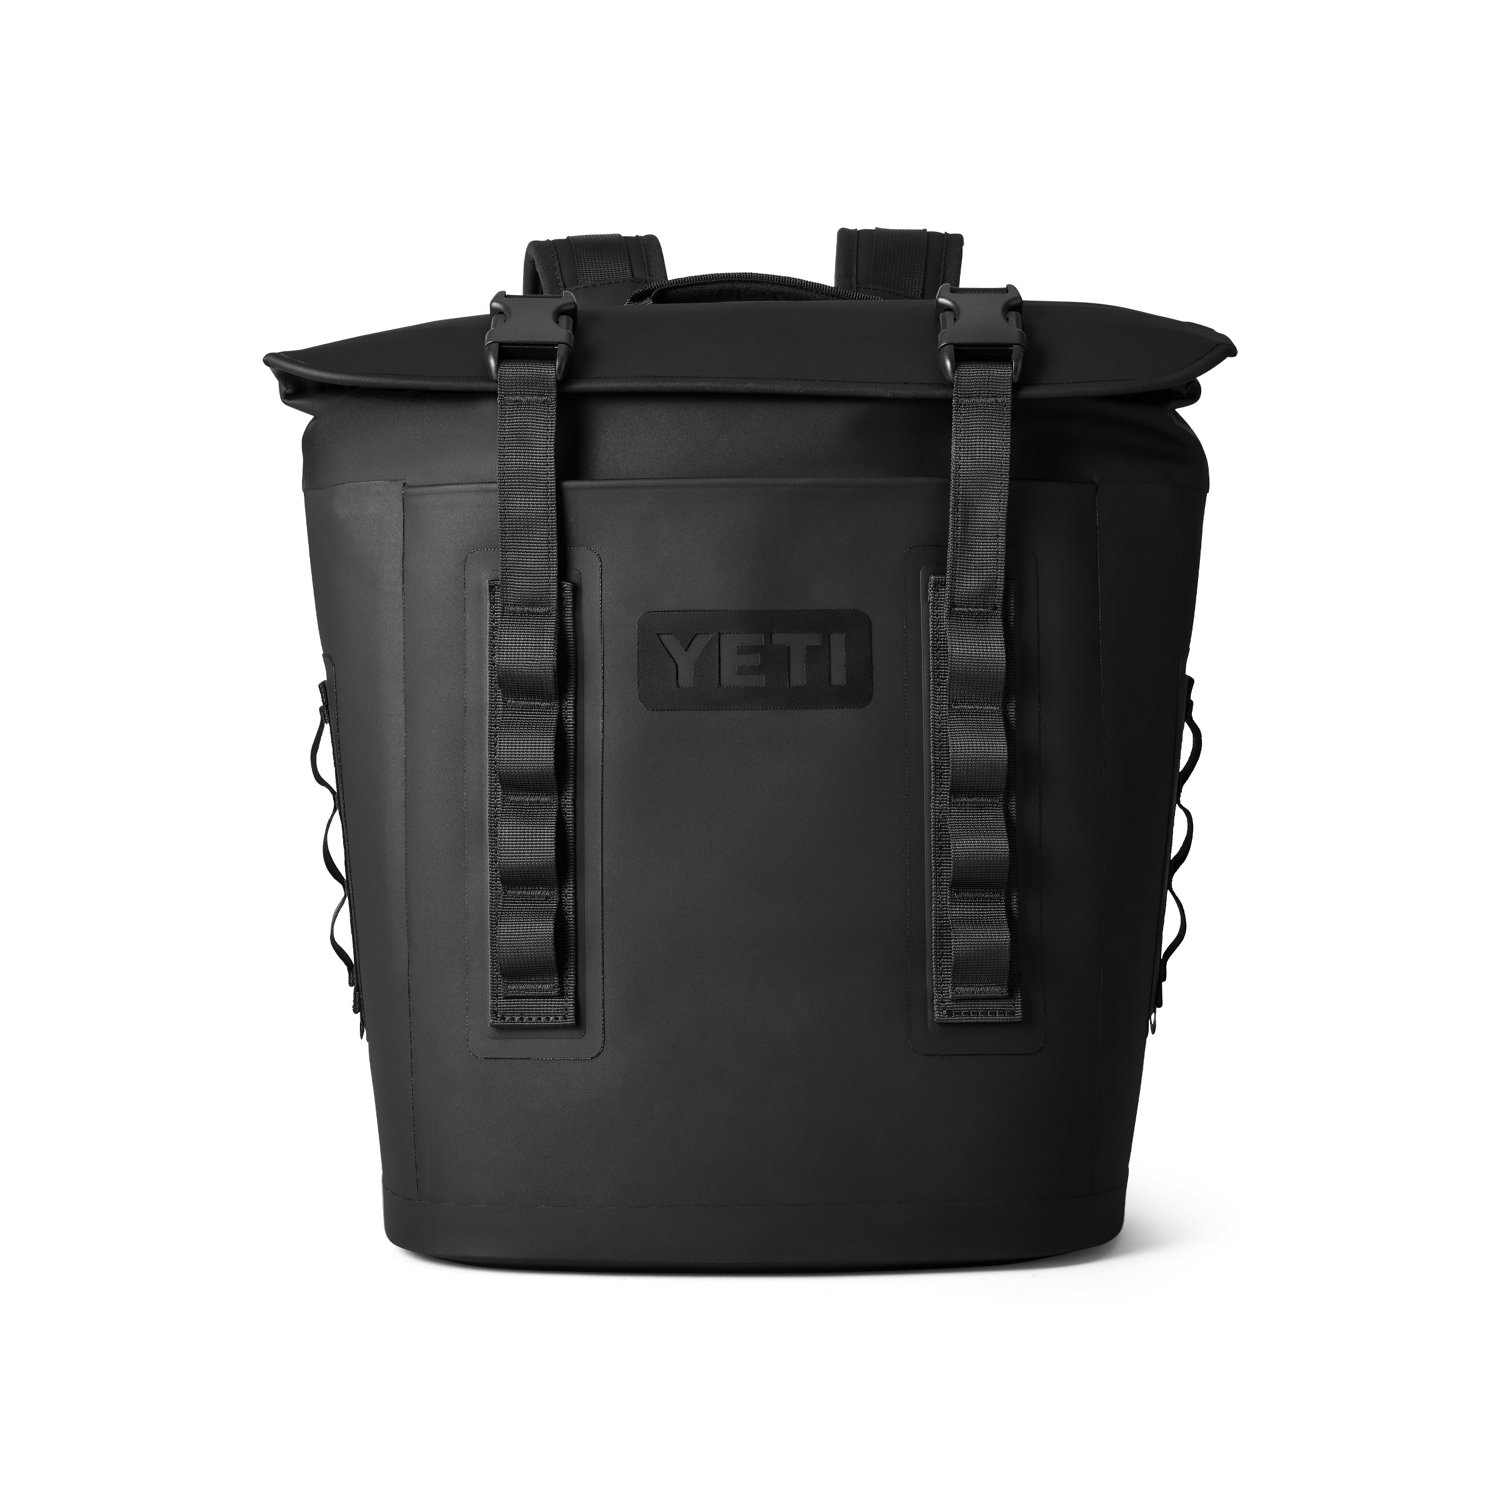 https://academy.scene7.com/is/image/academy//coolers/yeti-hopper-backpack-m12-soft-cooler-18060131336-black/f911976f75b14f5988abf74f7642fa0d?$pdp-mobile-gallery-ng$